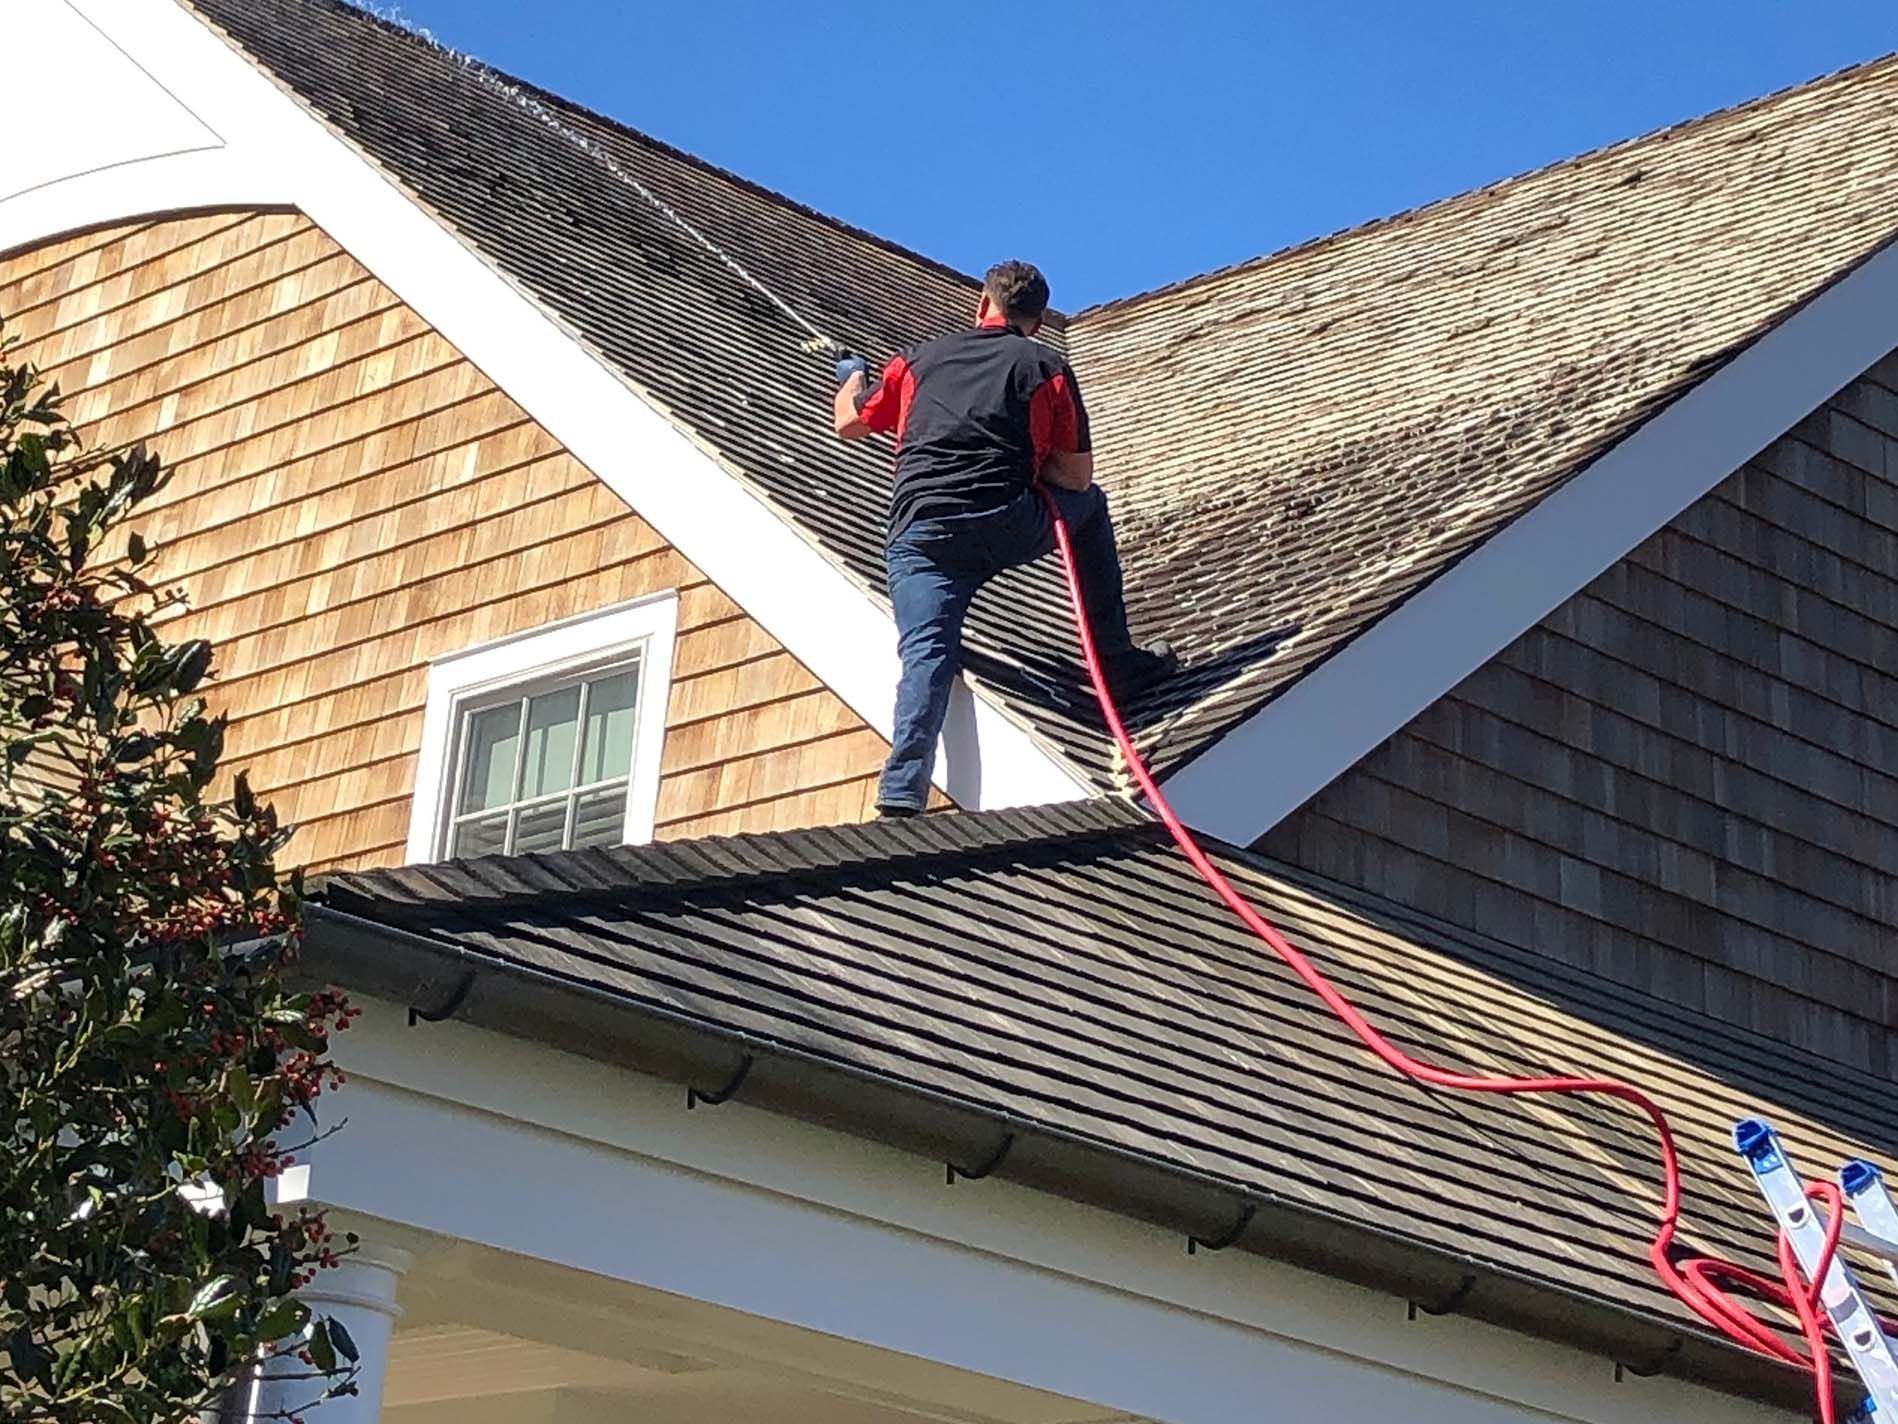 KOS roof soft washing services on Long Island. KOS Cleaning specializes in soft washing cedar shakes